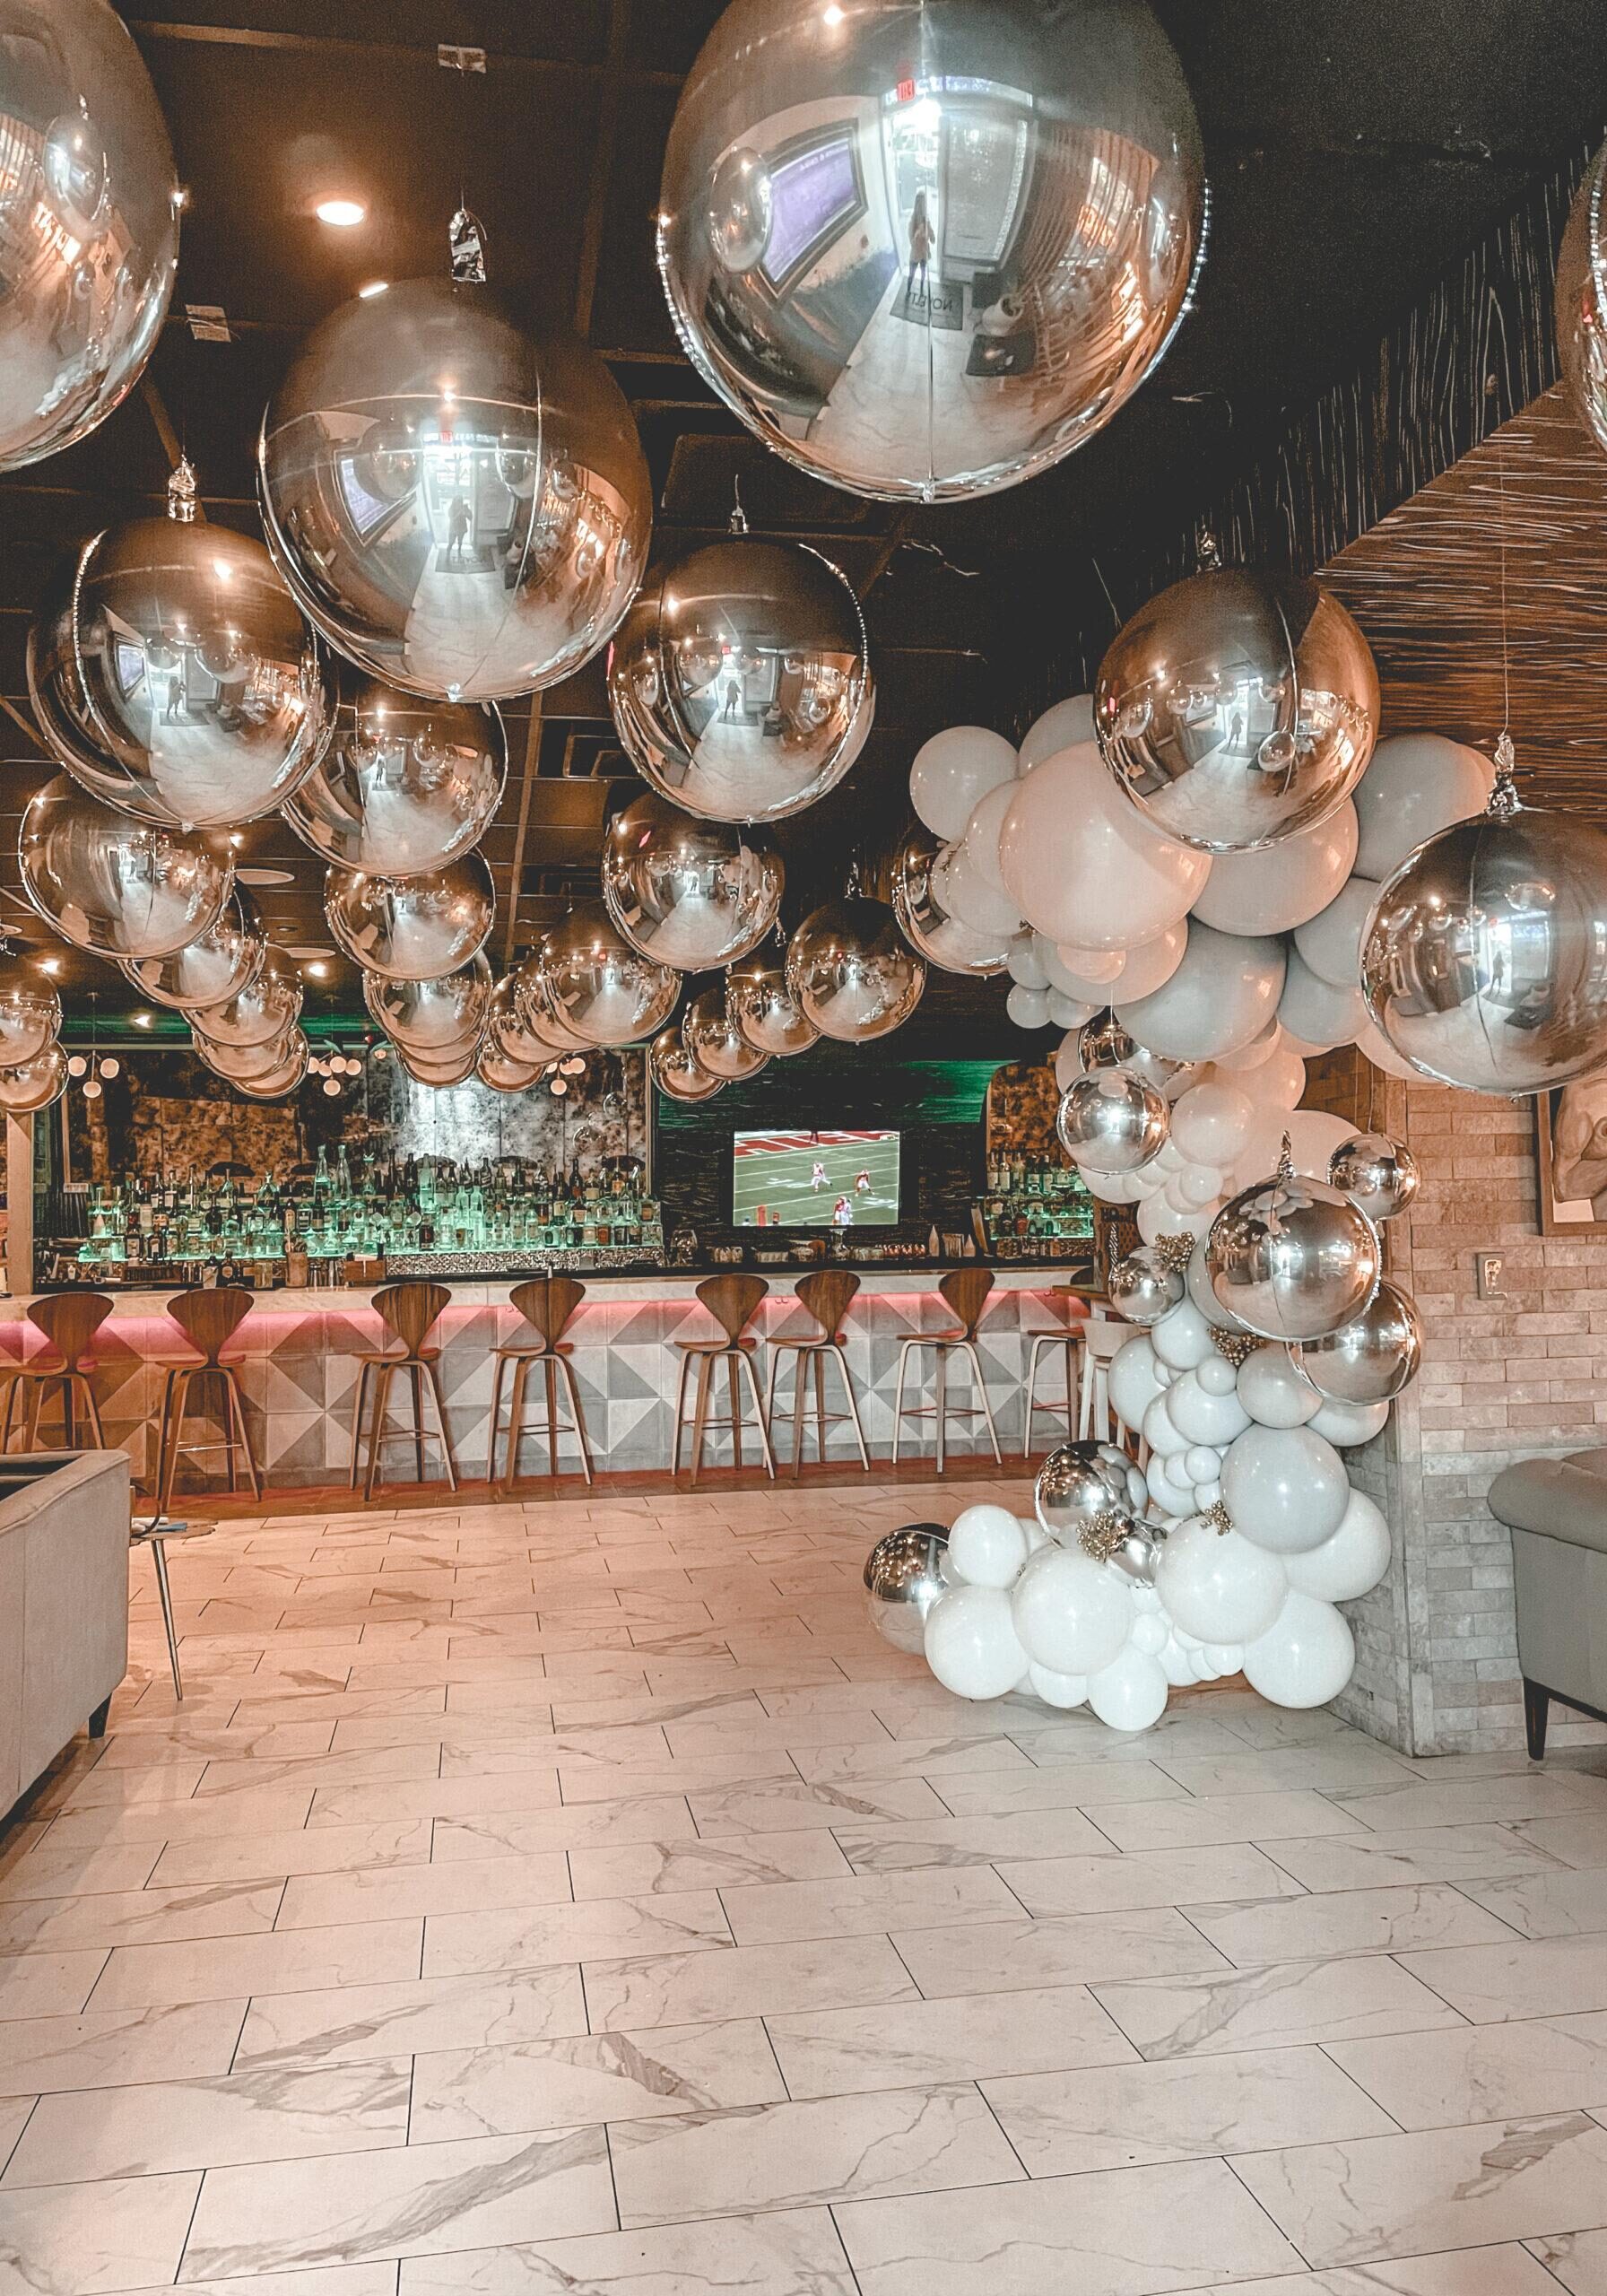 Corporate Bar and Balloons - Corporate Event Planned and Designed by L'élite Events